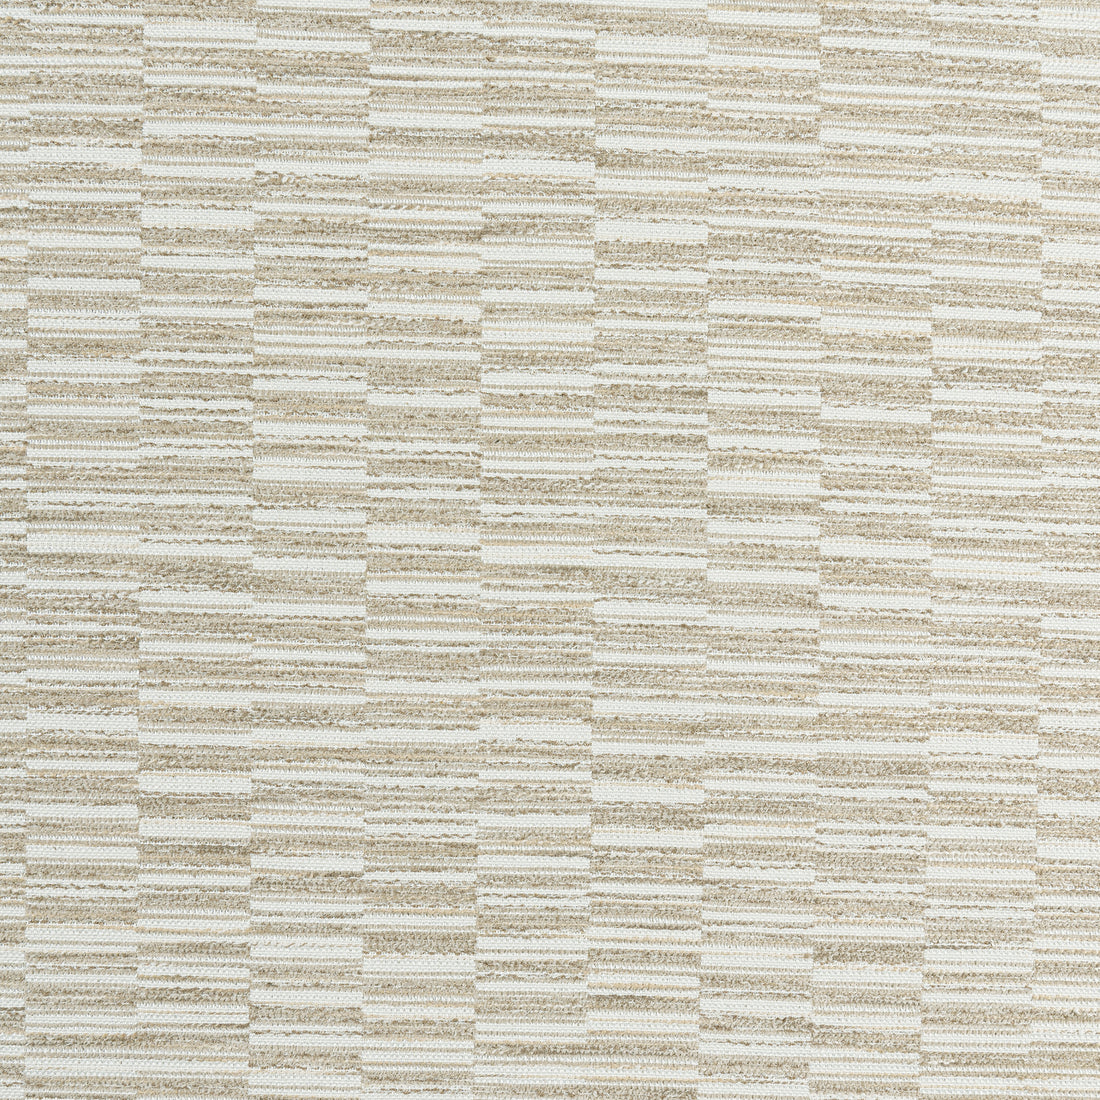 Legato fabric in cashmere color - pattern number W8108 - by Thibaut in the Sereno collection